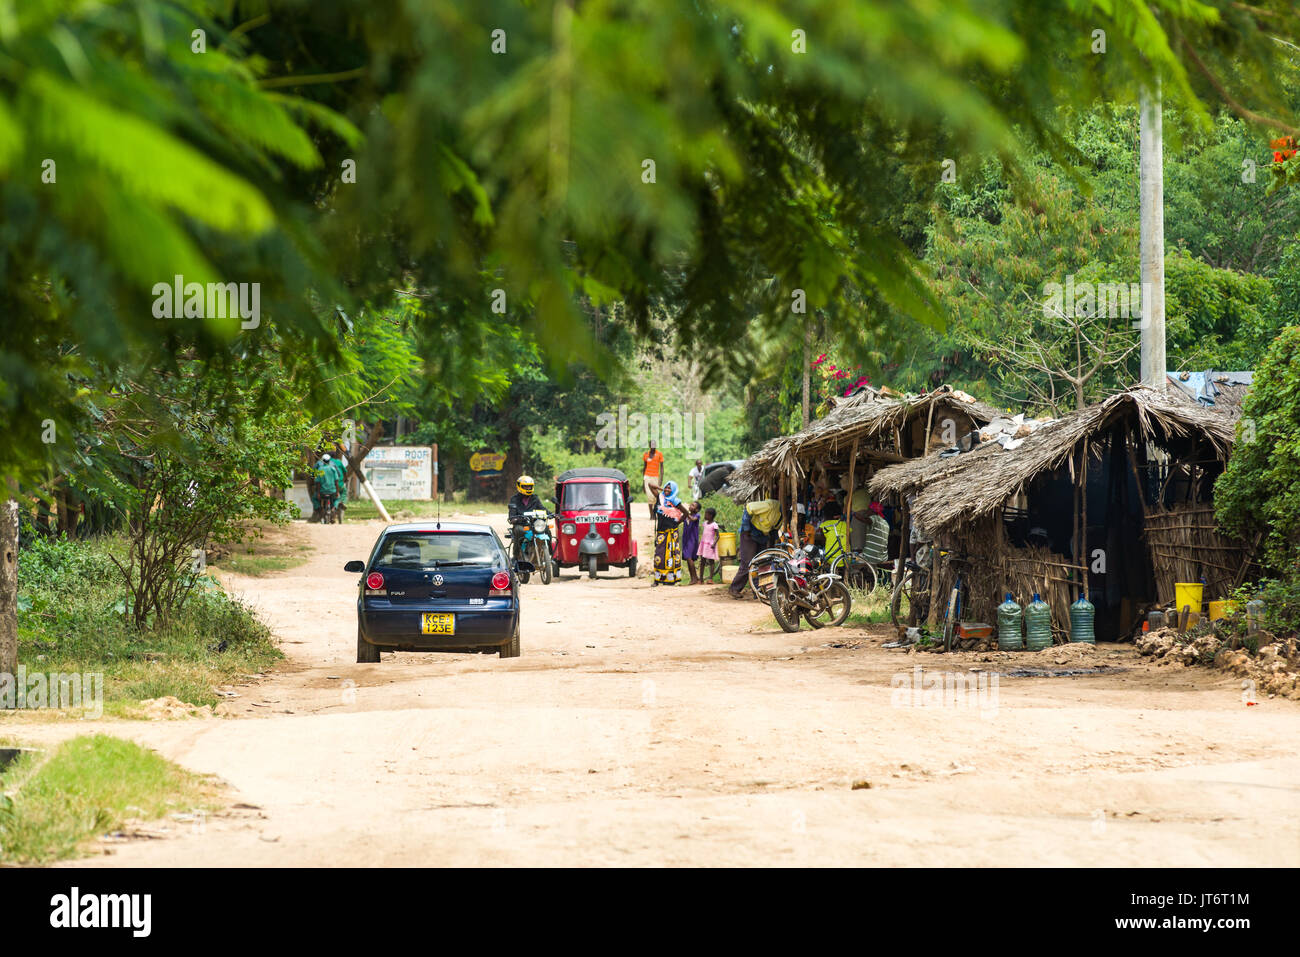 A car drives down a beach road with stalls on the roadside, Diani, Kenya Stock Photo